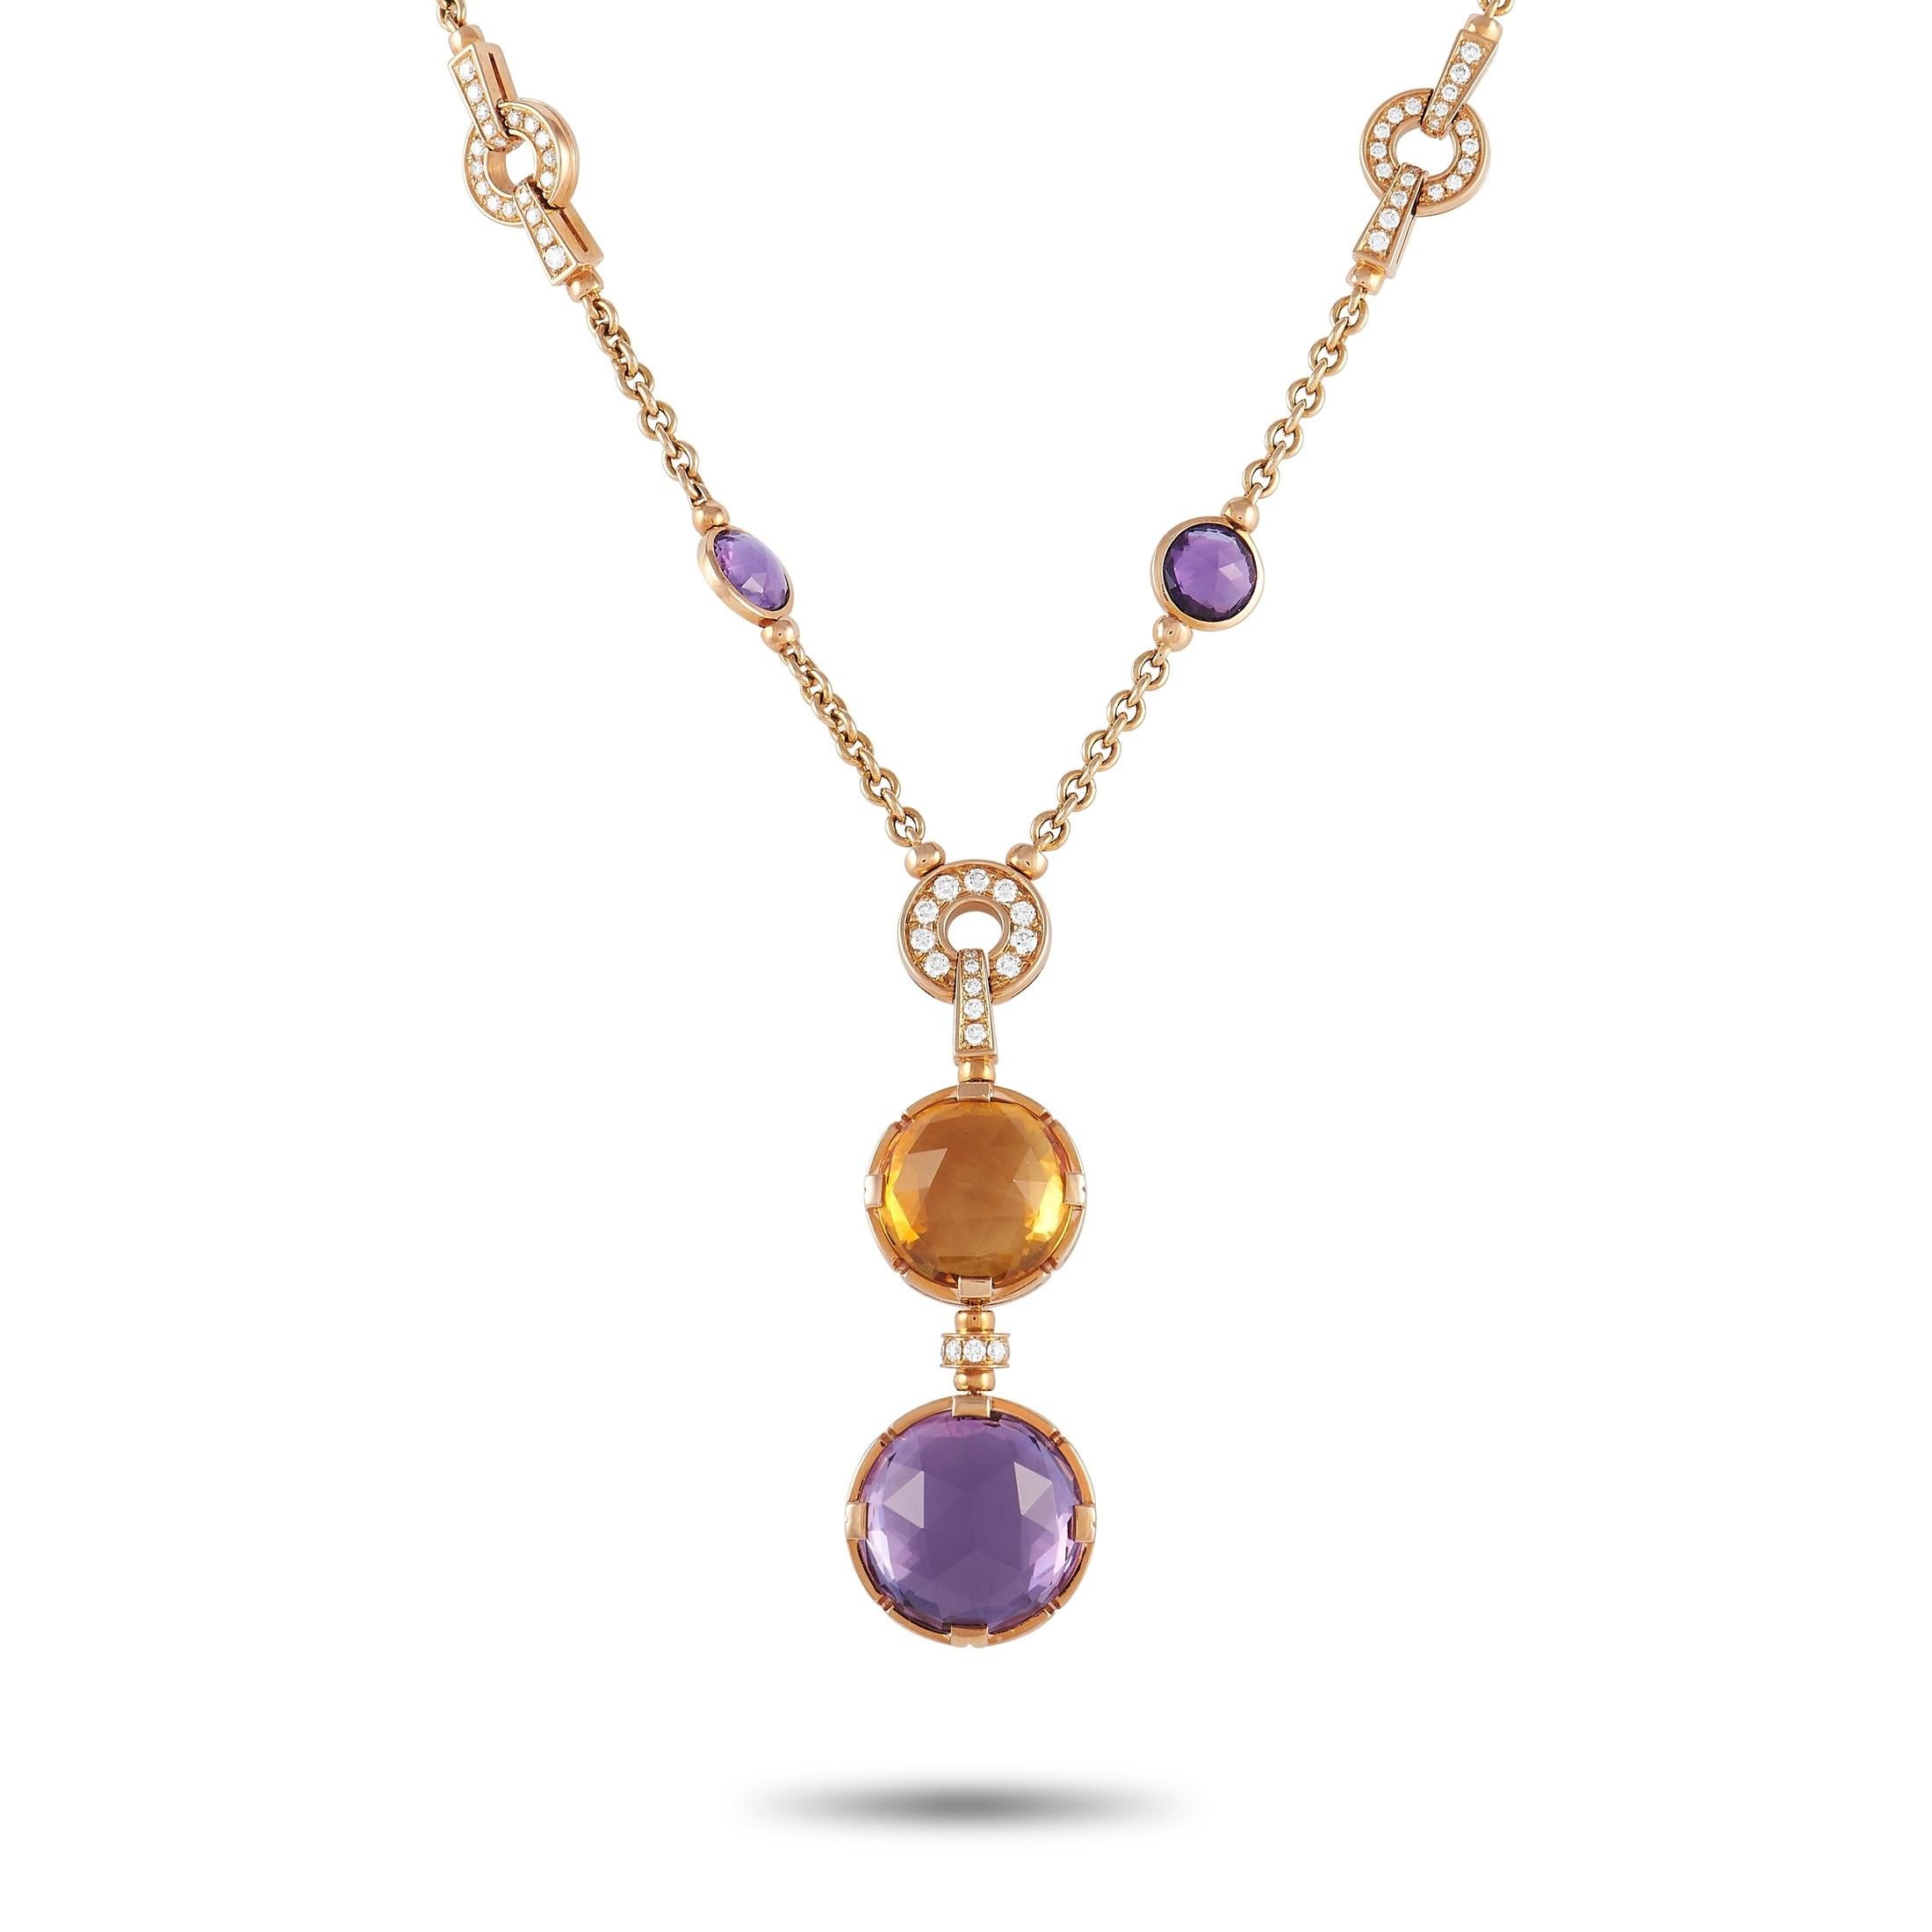 This Bvlgari Parentesi necklace features a dynamic design that will take your breath away. Crafted from 18K rose gold, this piece measures 17” long and sparkles thanks to inset diamonds totaling 1.70 carats. Citrine and amethyst gemstones a touch of